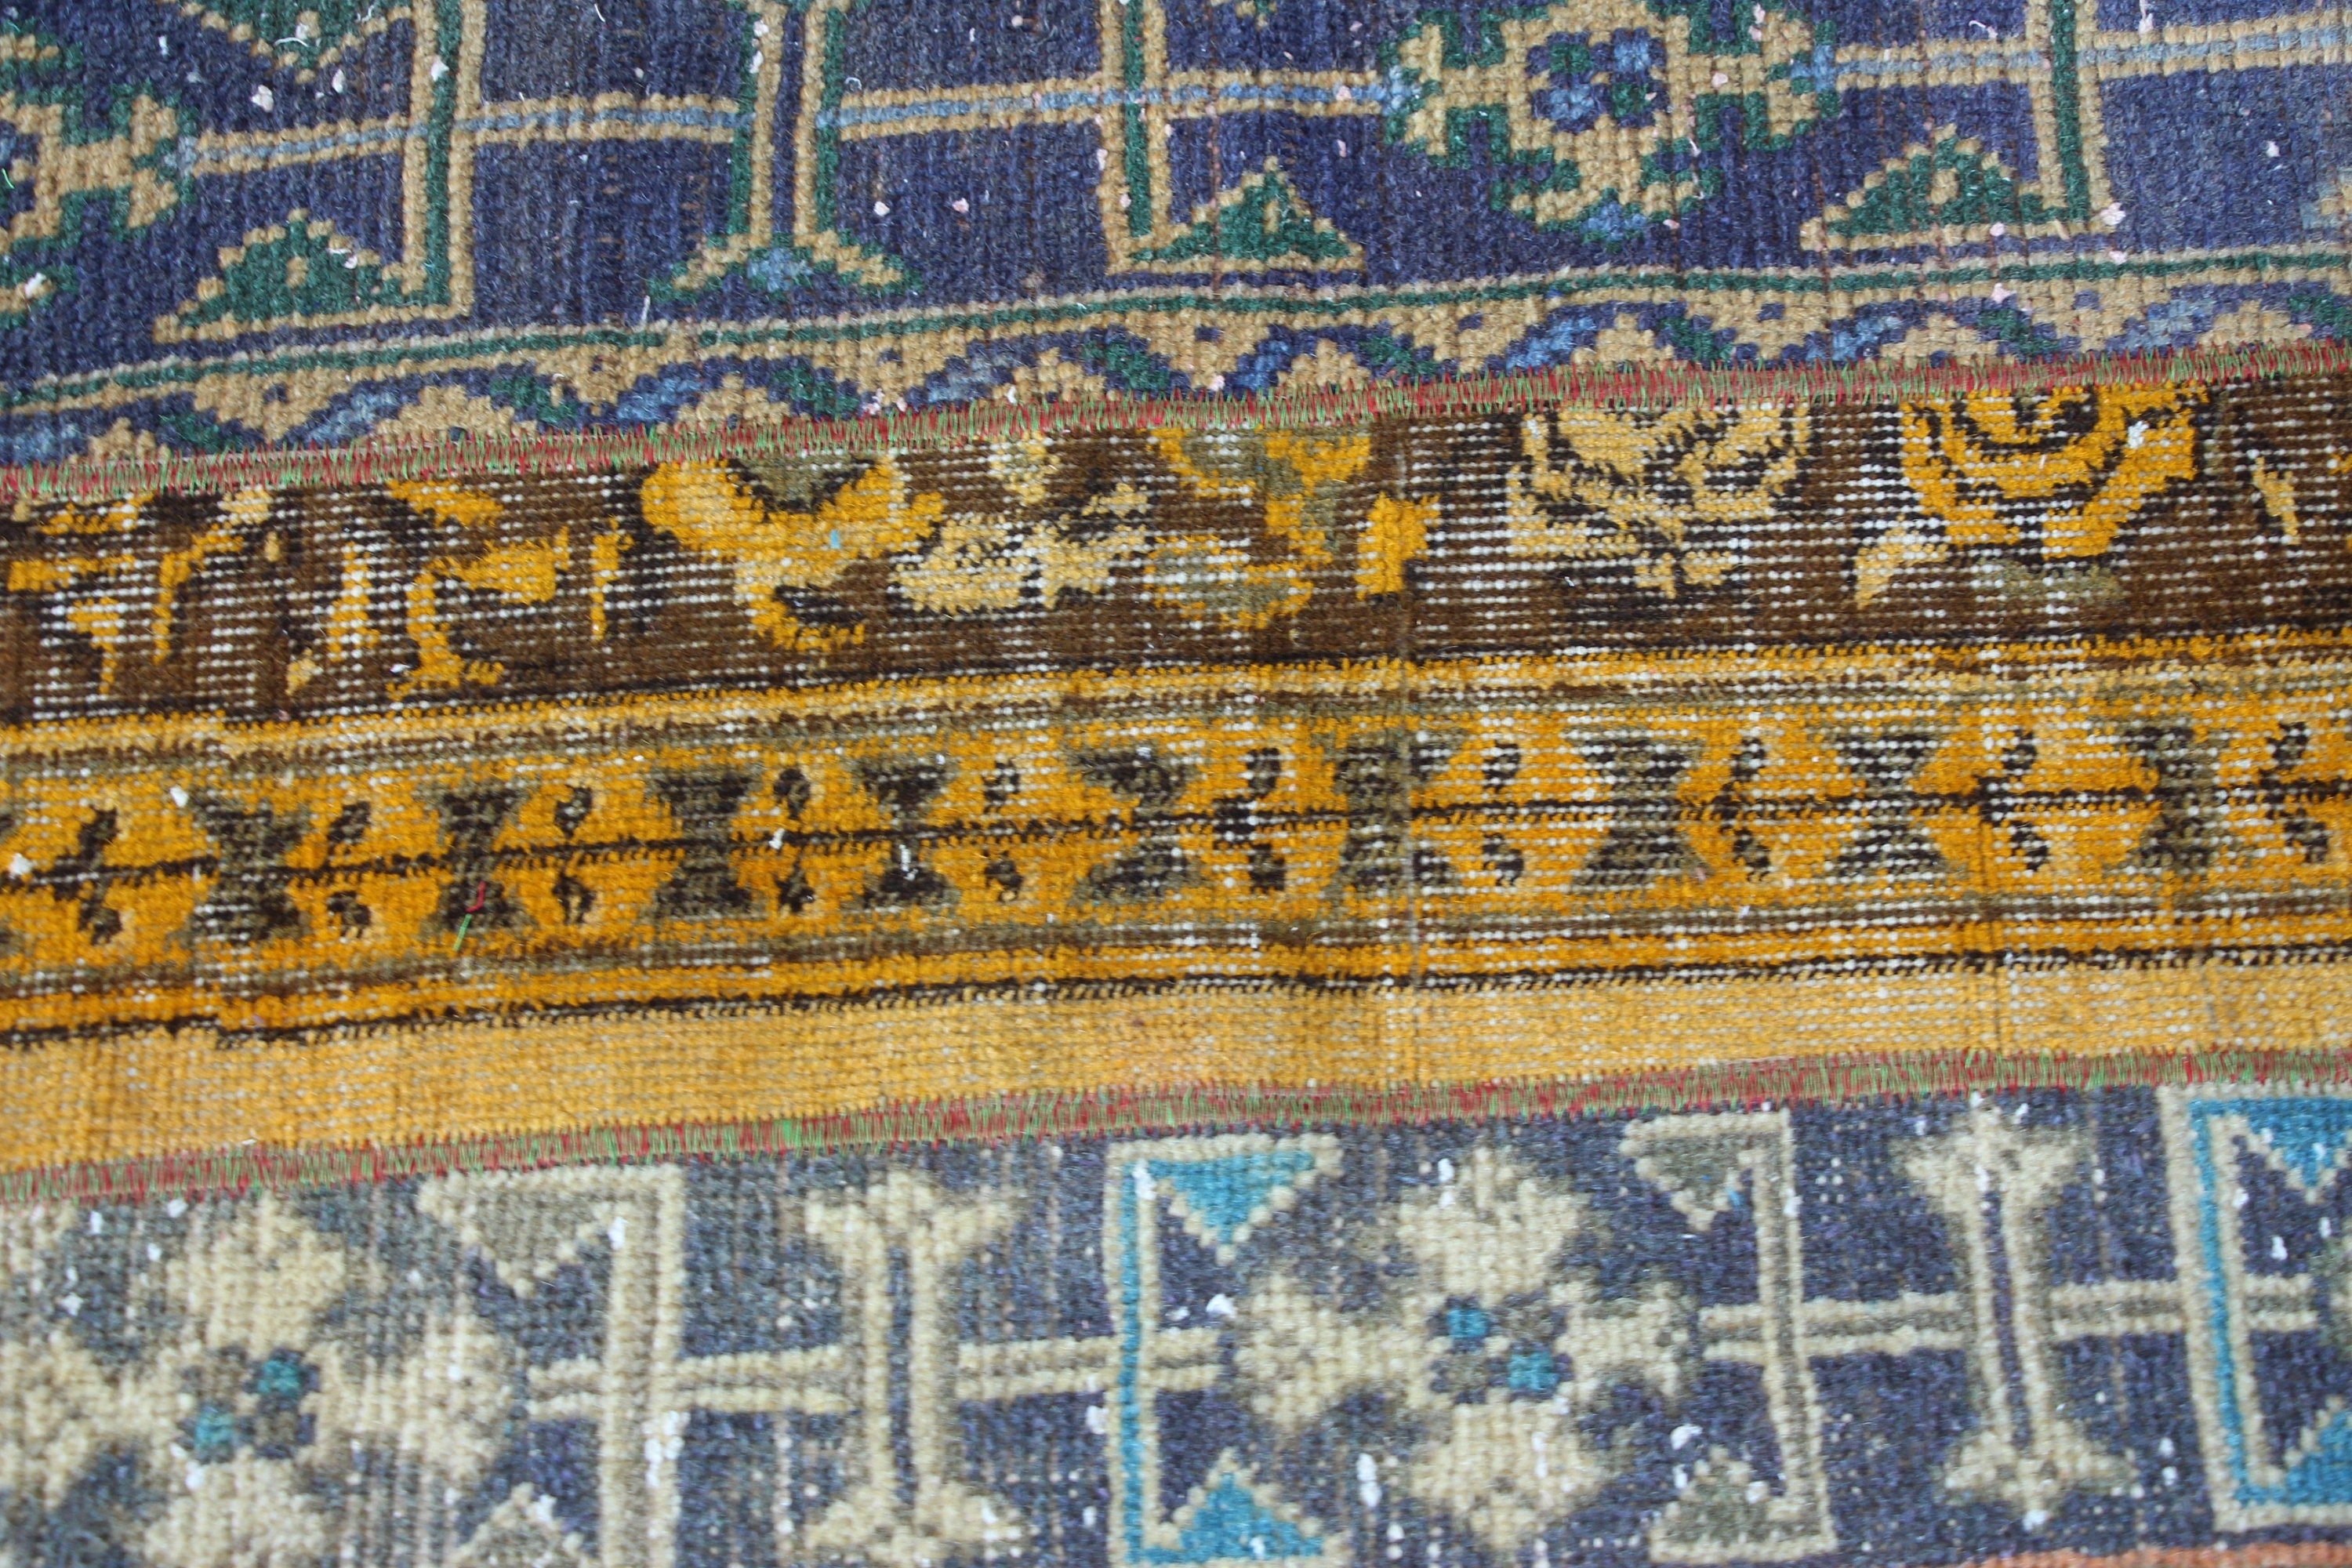 Vintage Rugs, Blue Oushak Rug, 2x4 ft Small Rug, Bedroom Rugs, Rugs for Door Mat, Antique Rug, Wall Hanging Rug, Kitchen Rug, Turkish Rugs